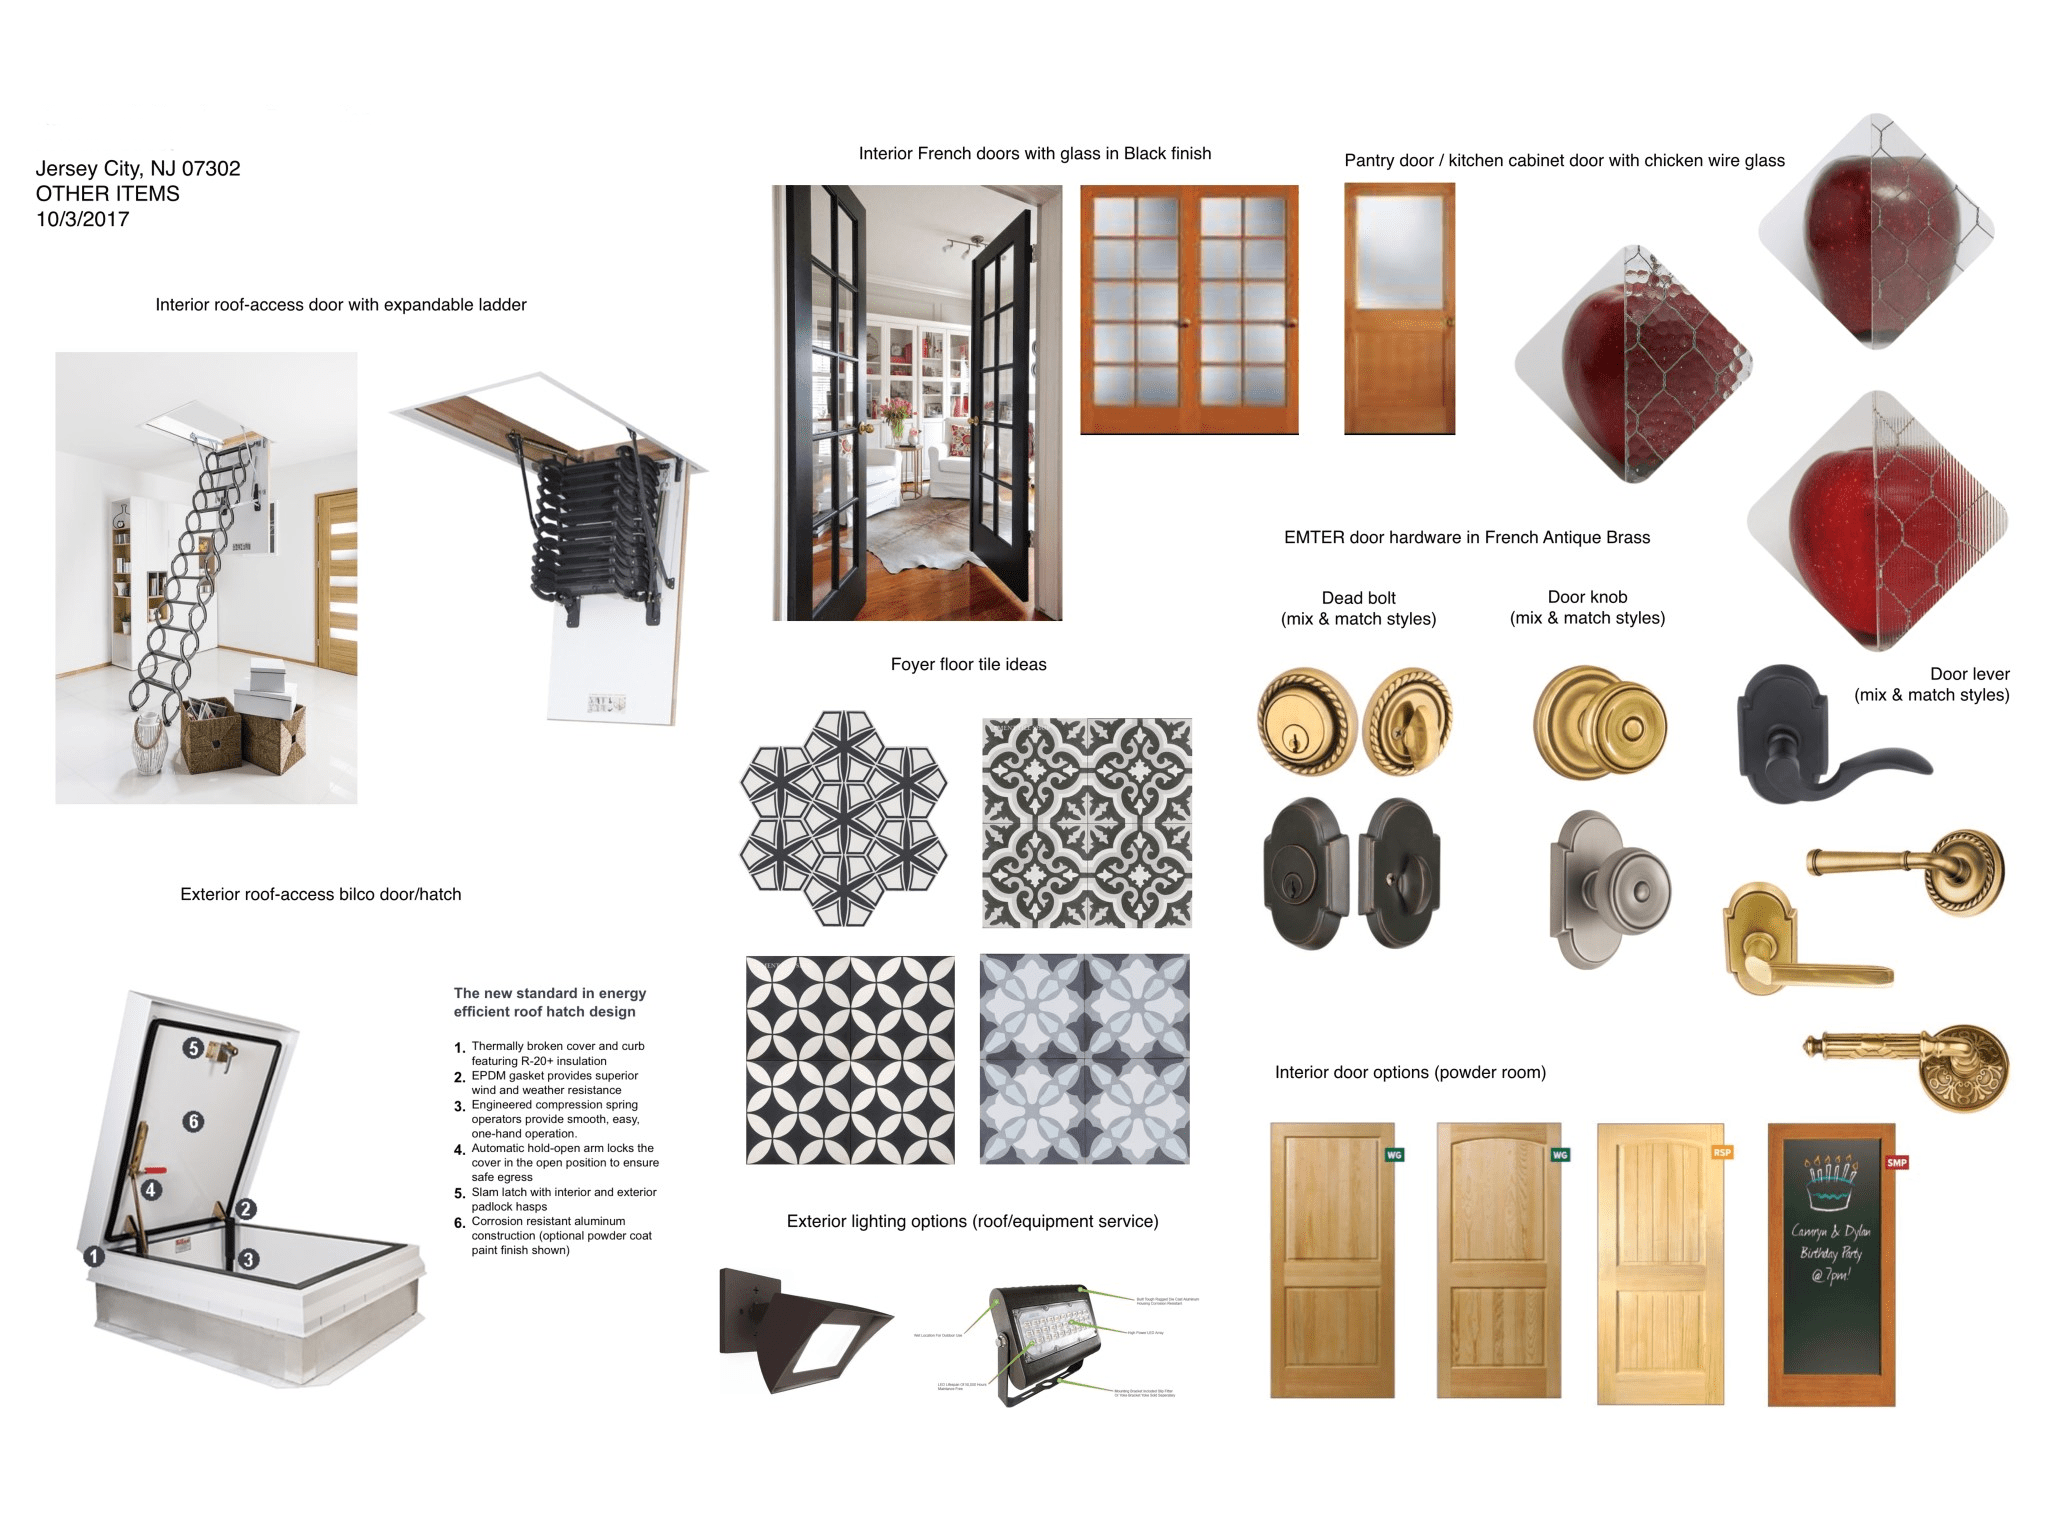 Historic District Brownstone Remodel Project In Process History Revitalized Other Items Mood Board